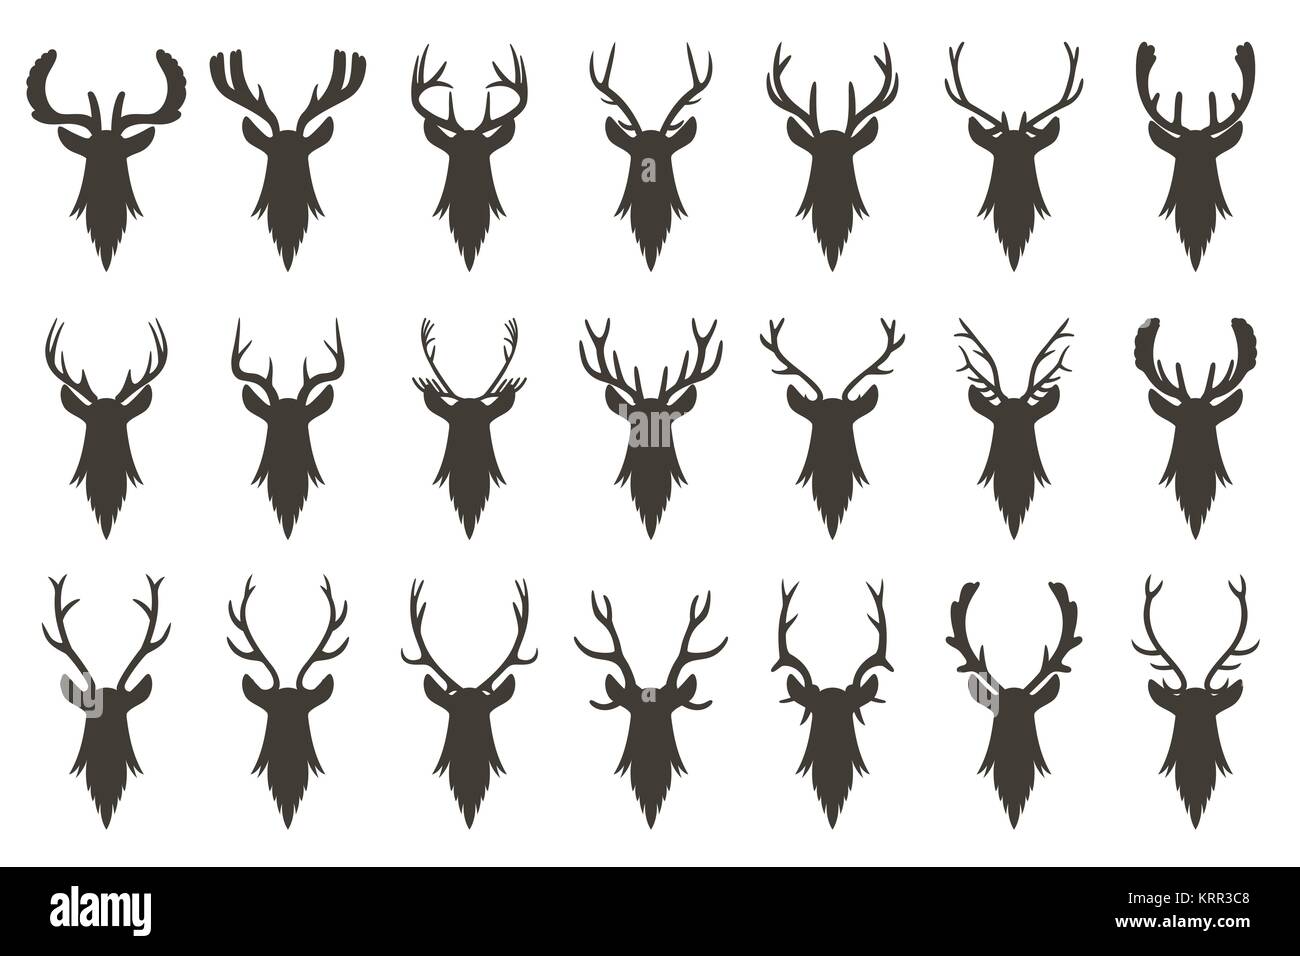 Black silhouettes of deer head with antlers - isolated on white background Stock Vector